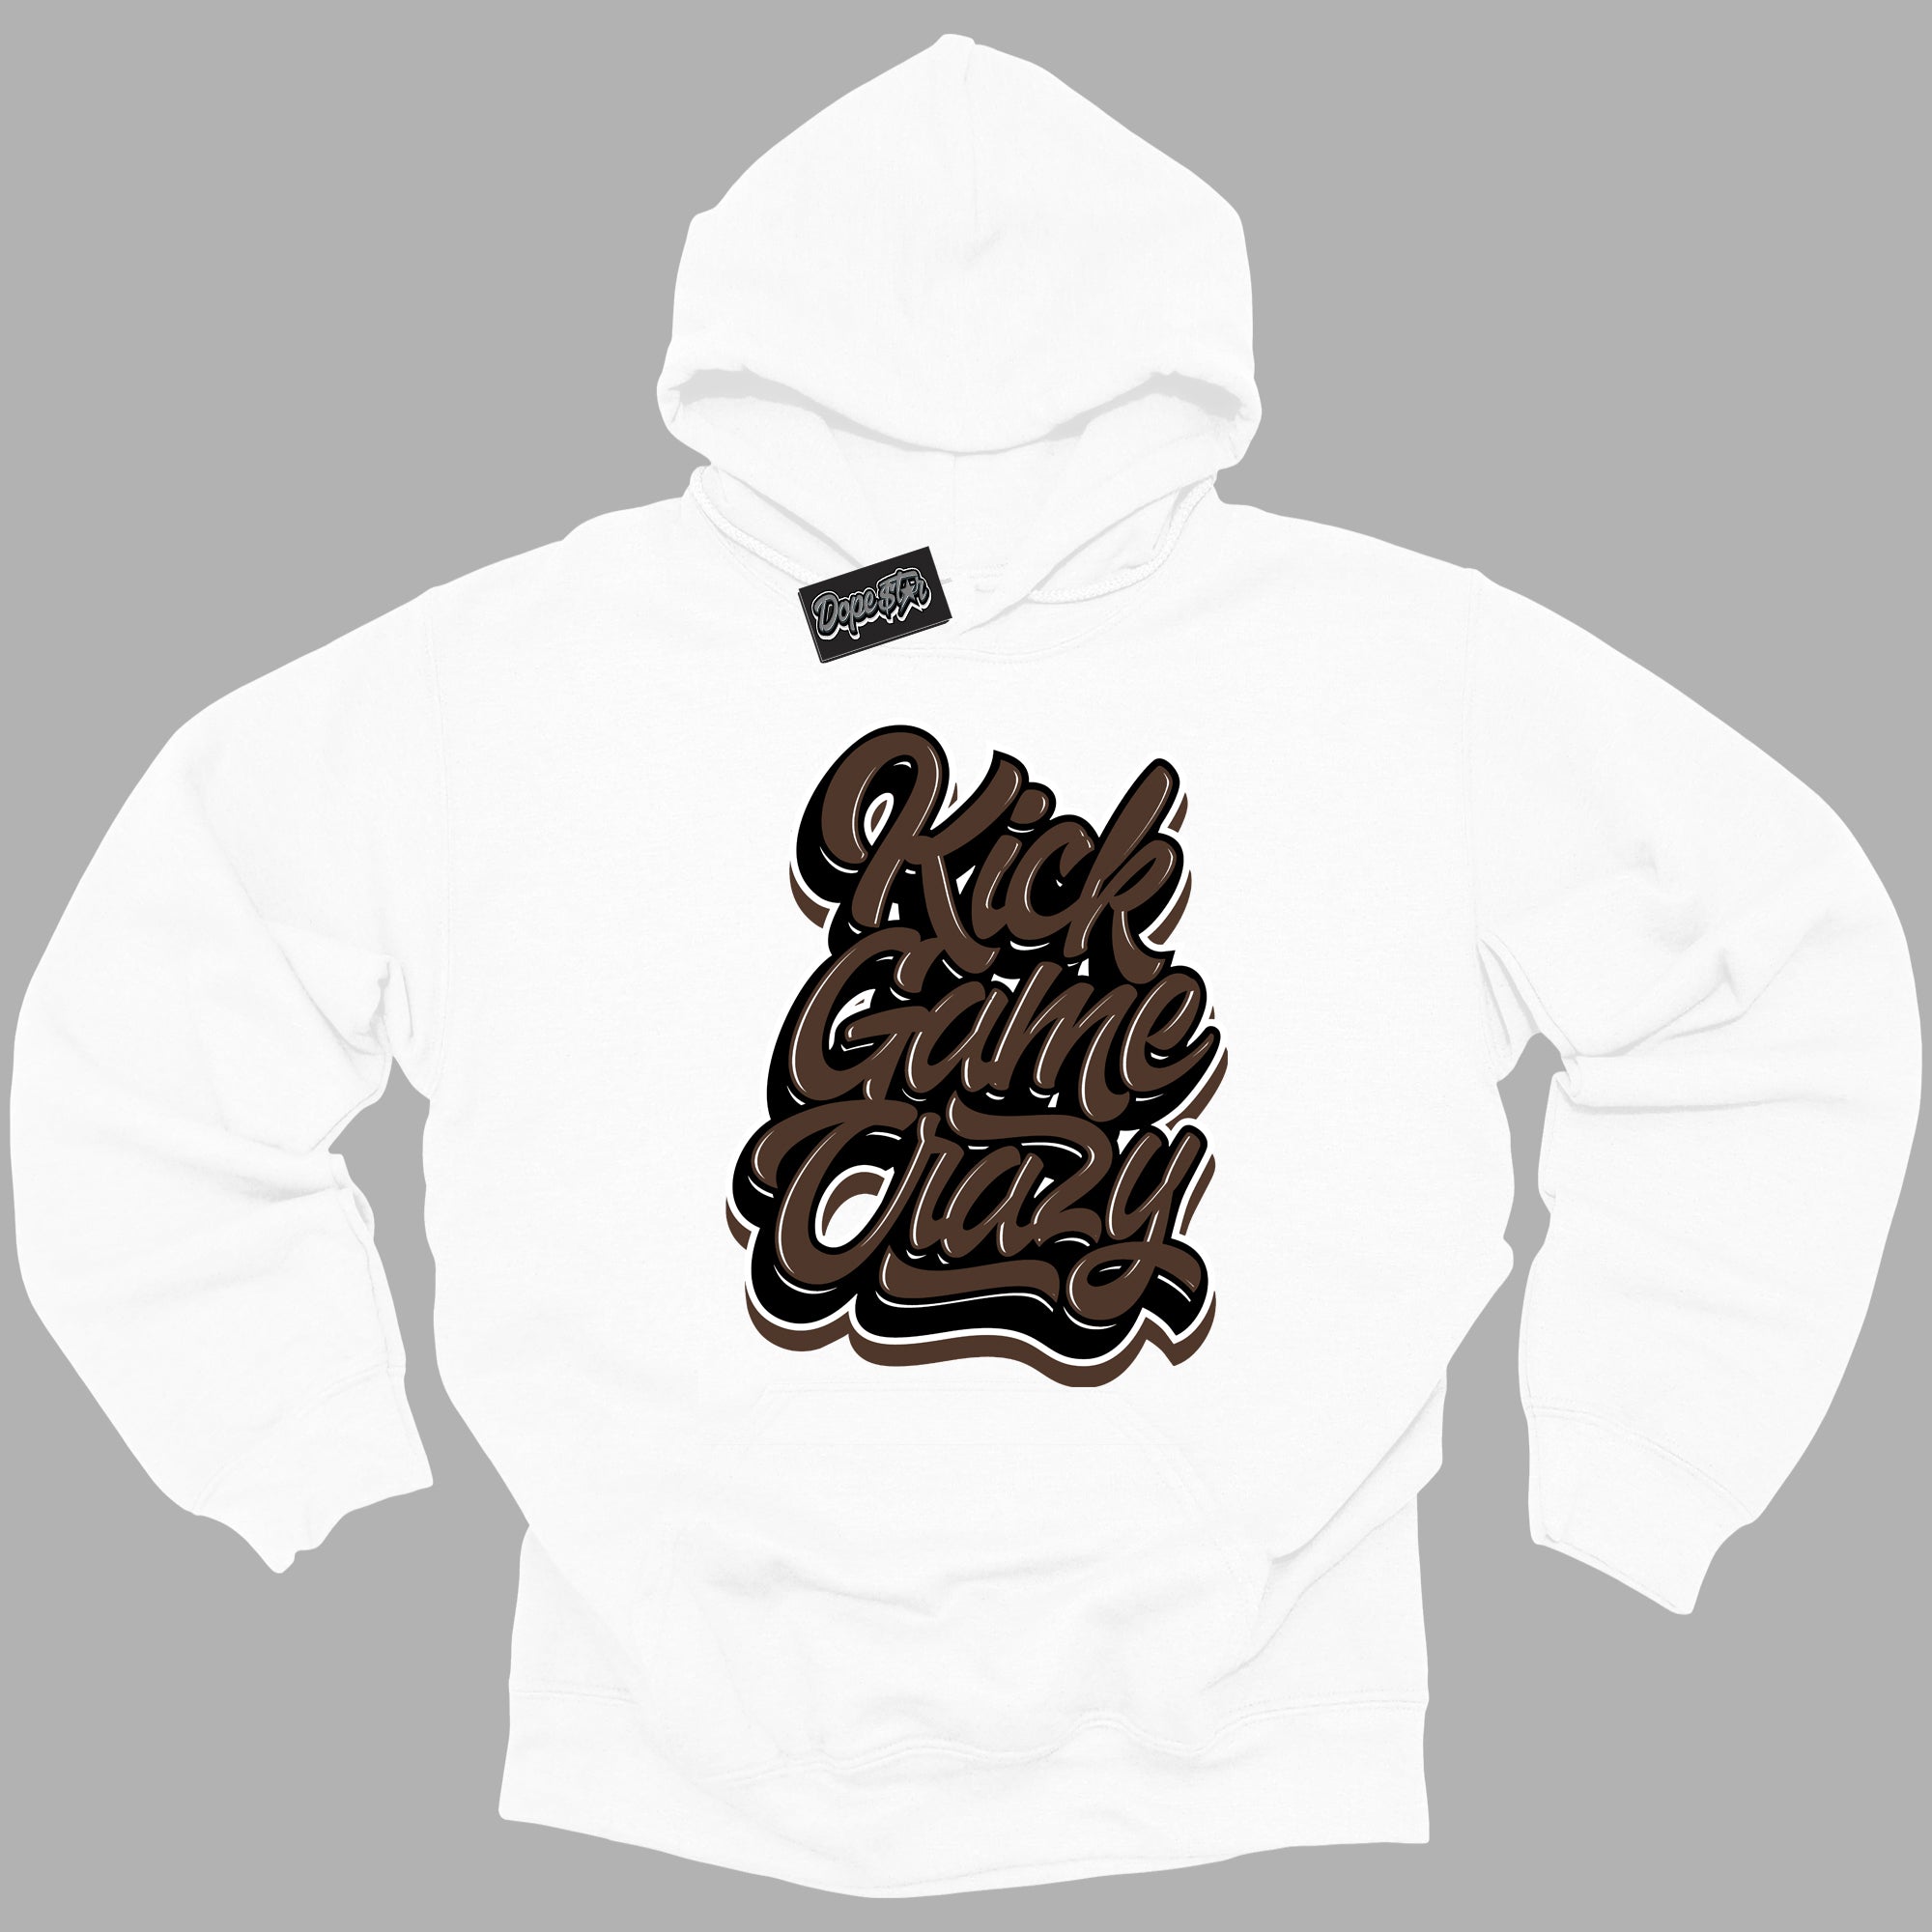 Cool White Graphic DopeStar Hoodie with “ Kick Game Crazy “ print, that perfectly matches Palomino 1s sneakers